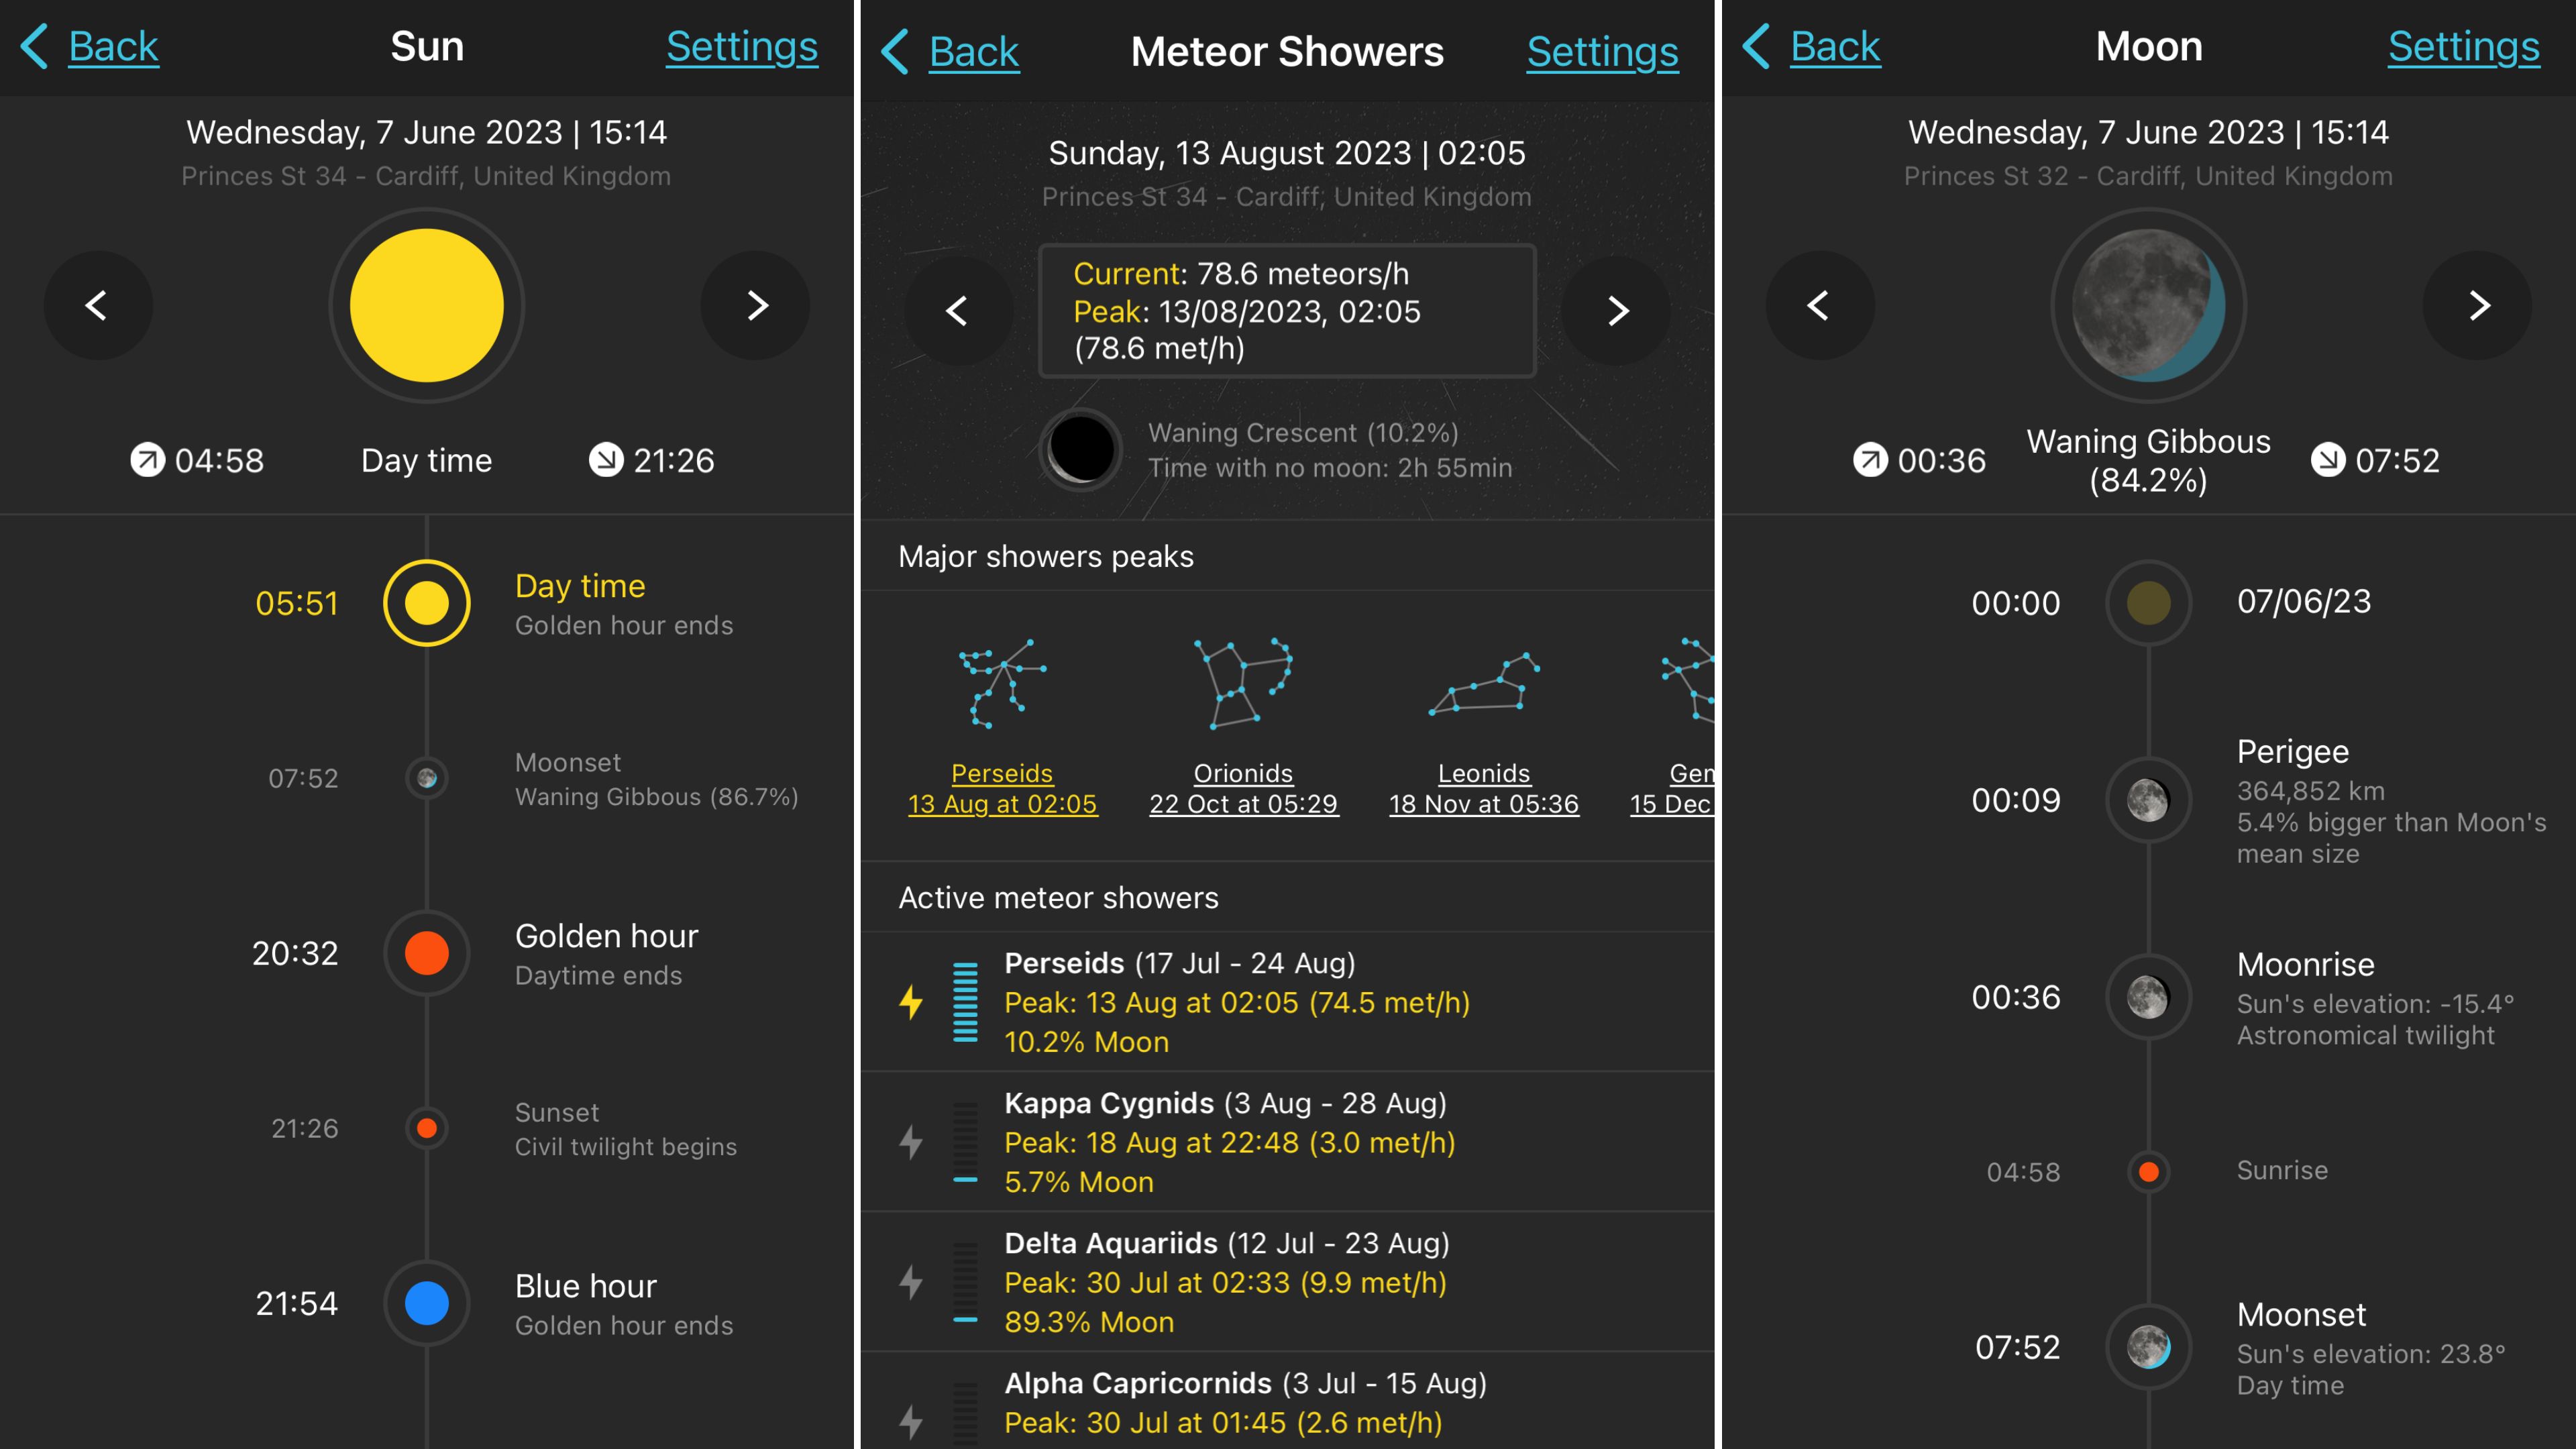 Screens from the app showing timelines of the movement of the sun, meteor showers and moon